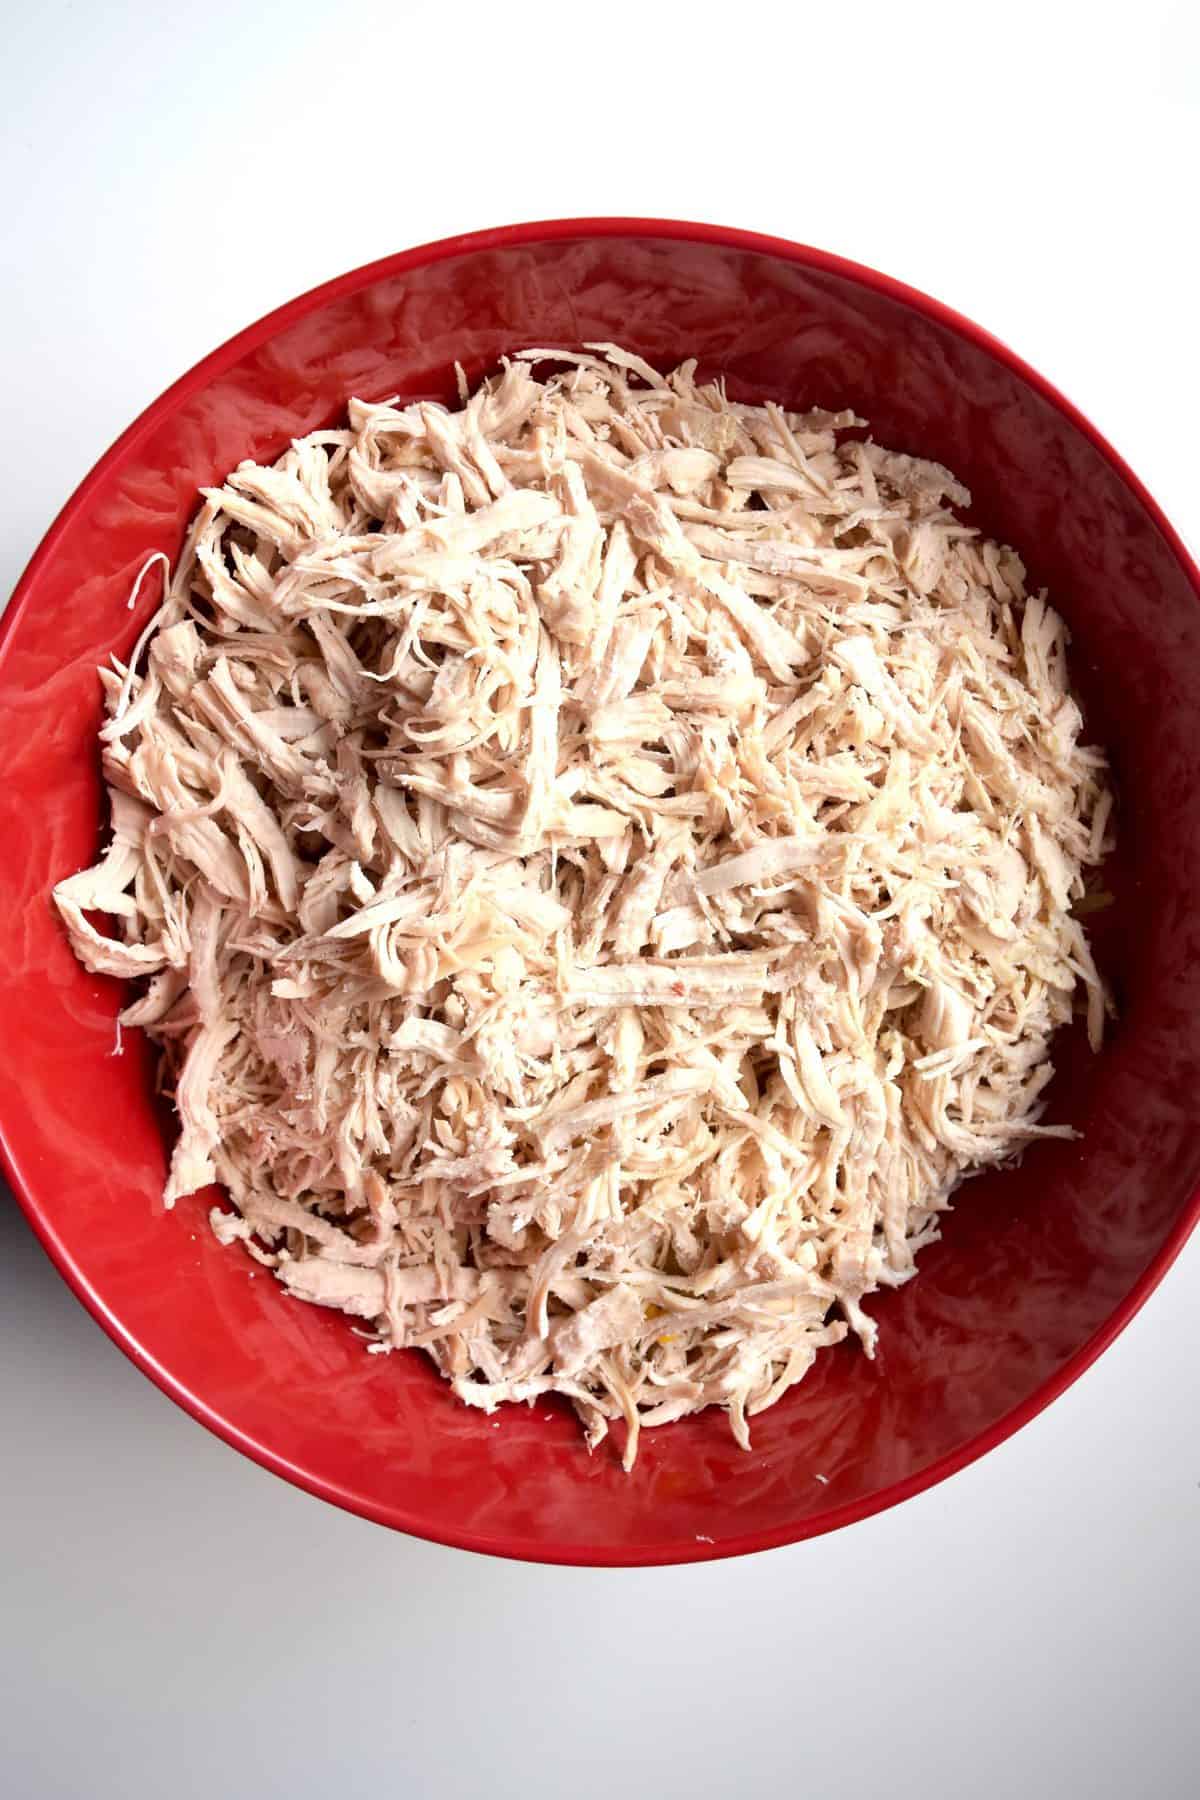 Shredded rotisserie chicken is in a large red bowl. The bowl sits on a white surface.